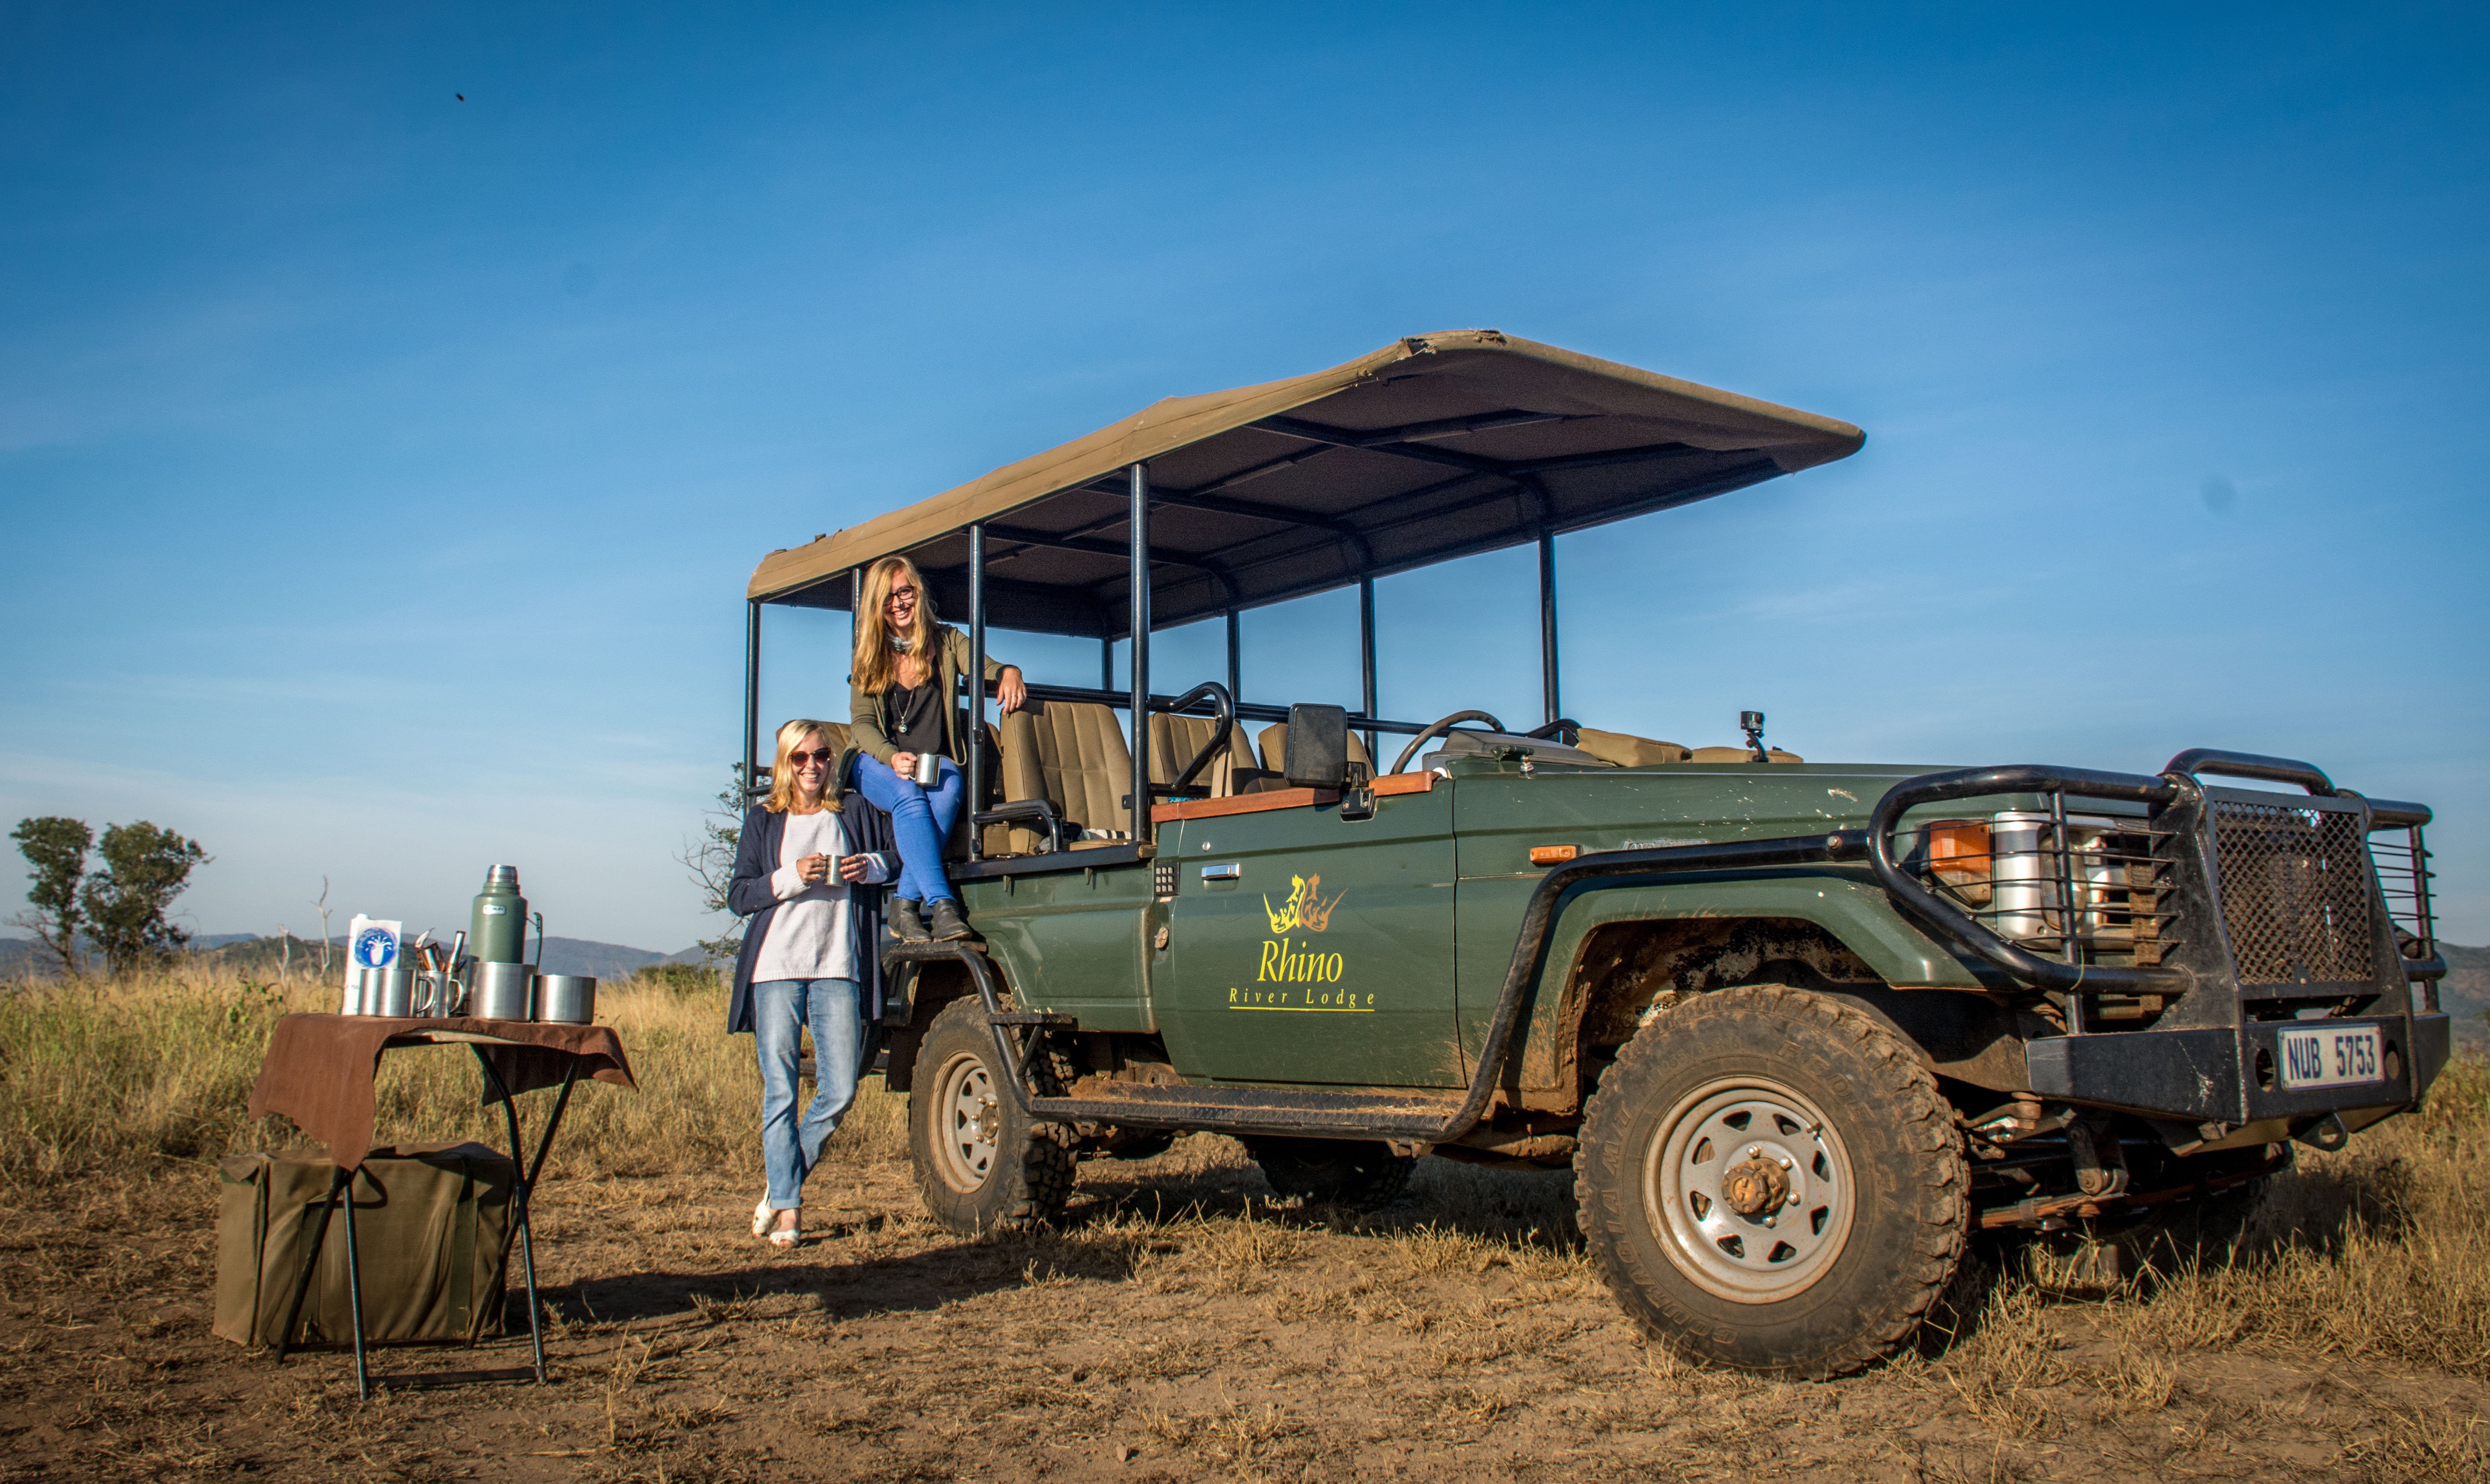 Find your inner child - go on safari to Rhino River Lodge